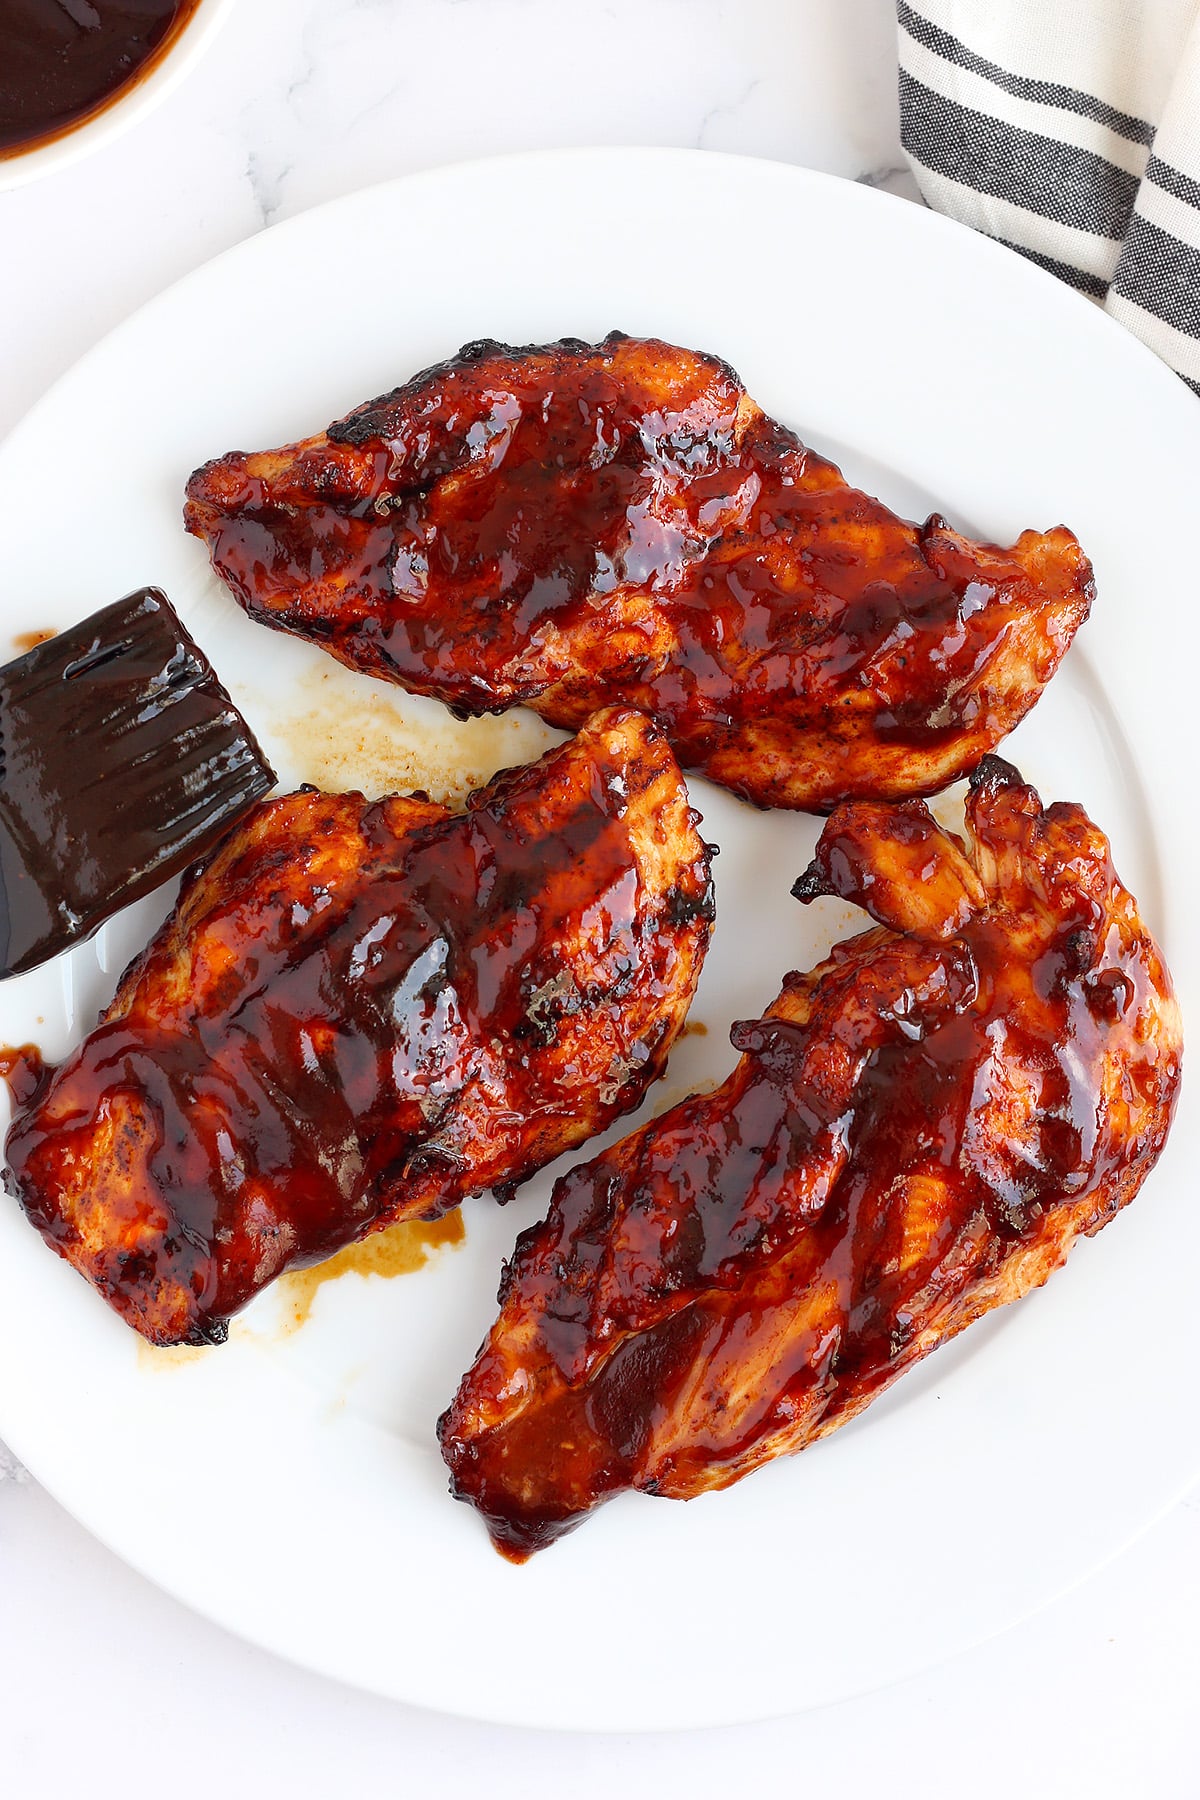 Charred BBQ chicken with sizzling BBQ sauce